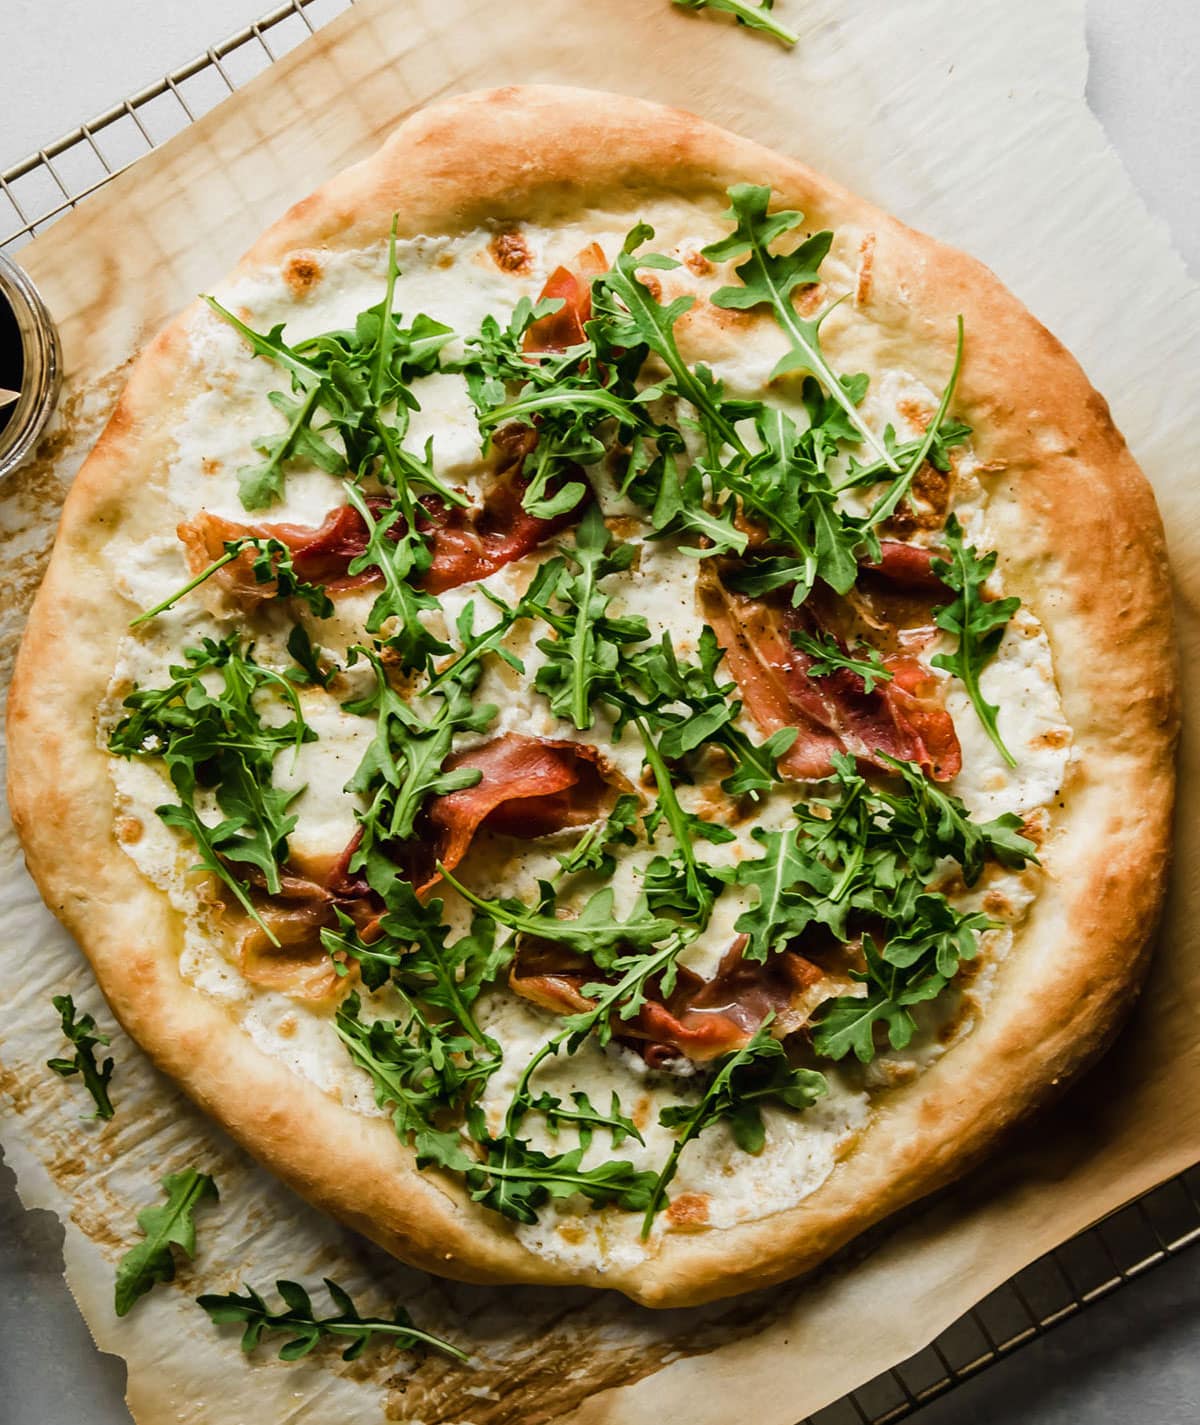 Prosciutto pizza topped with fresh arugula, sitting on a piece of parchment paper.